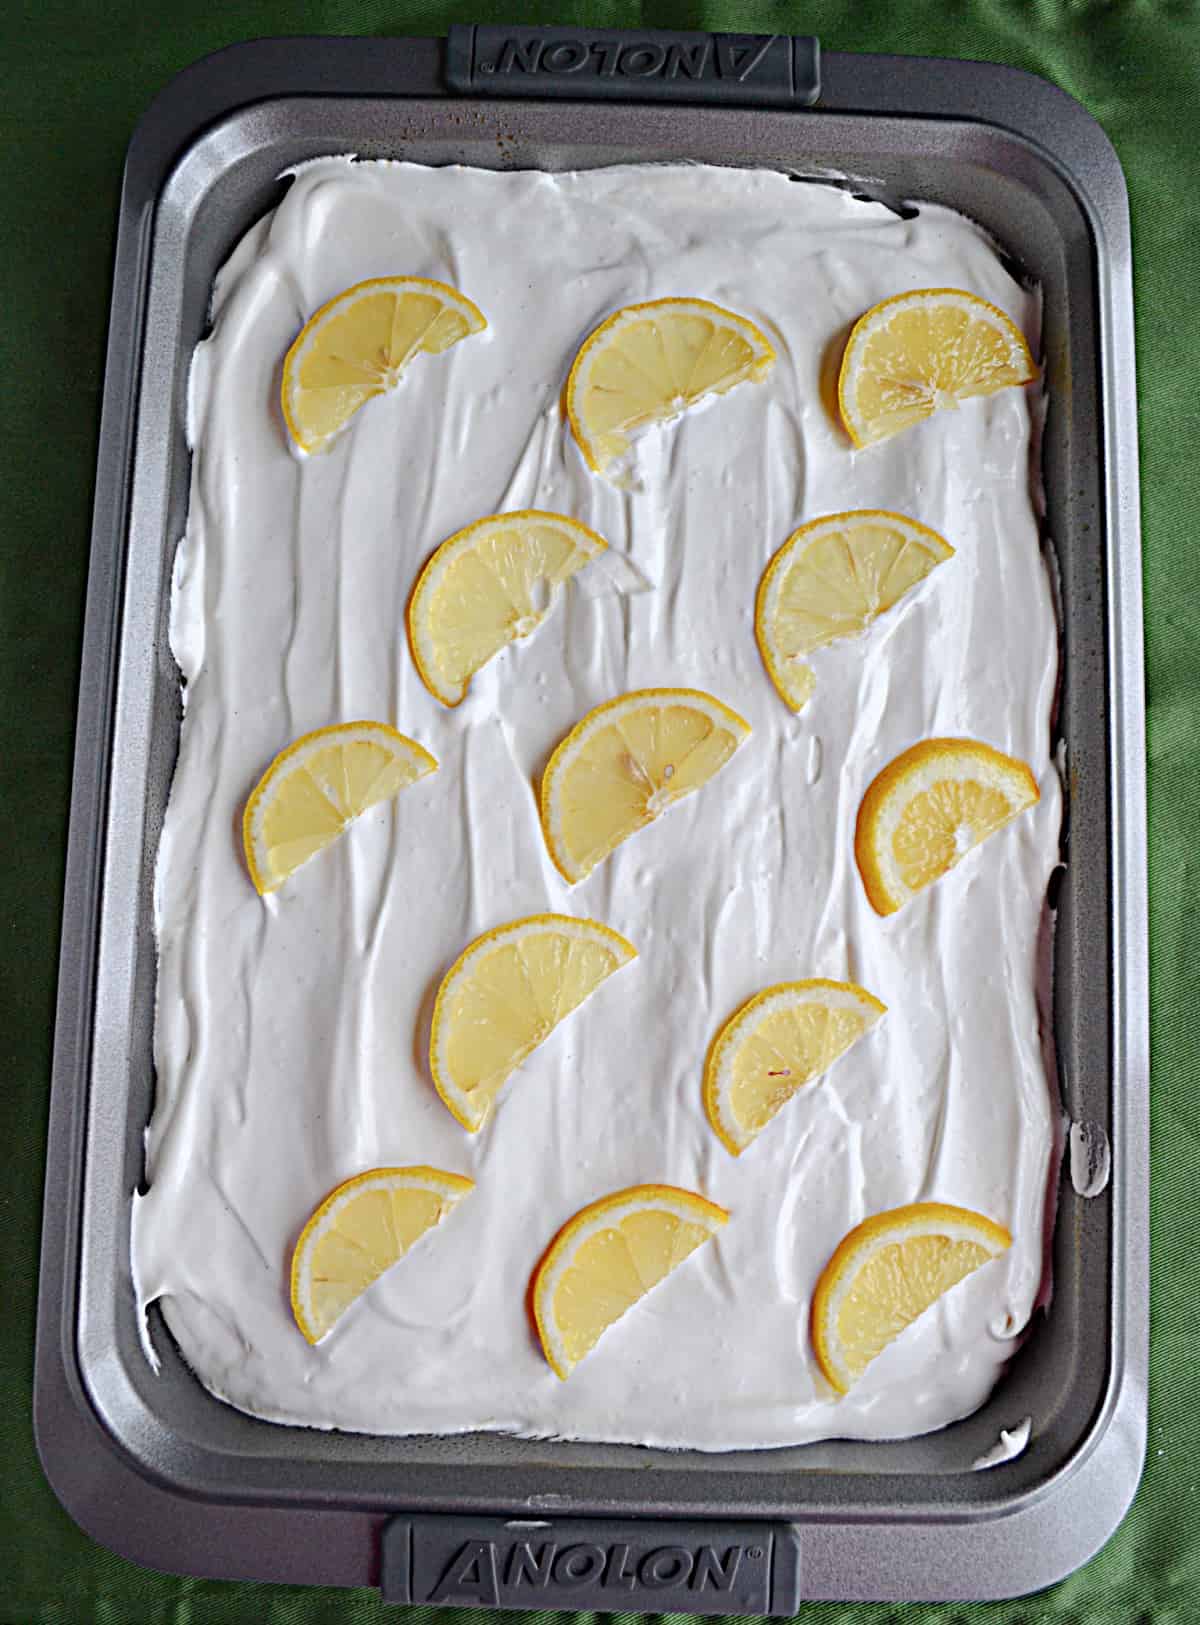 A cake with whipped frosting and lemon wedges on top.